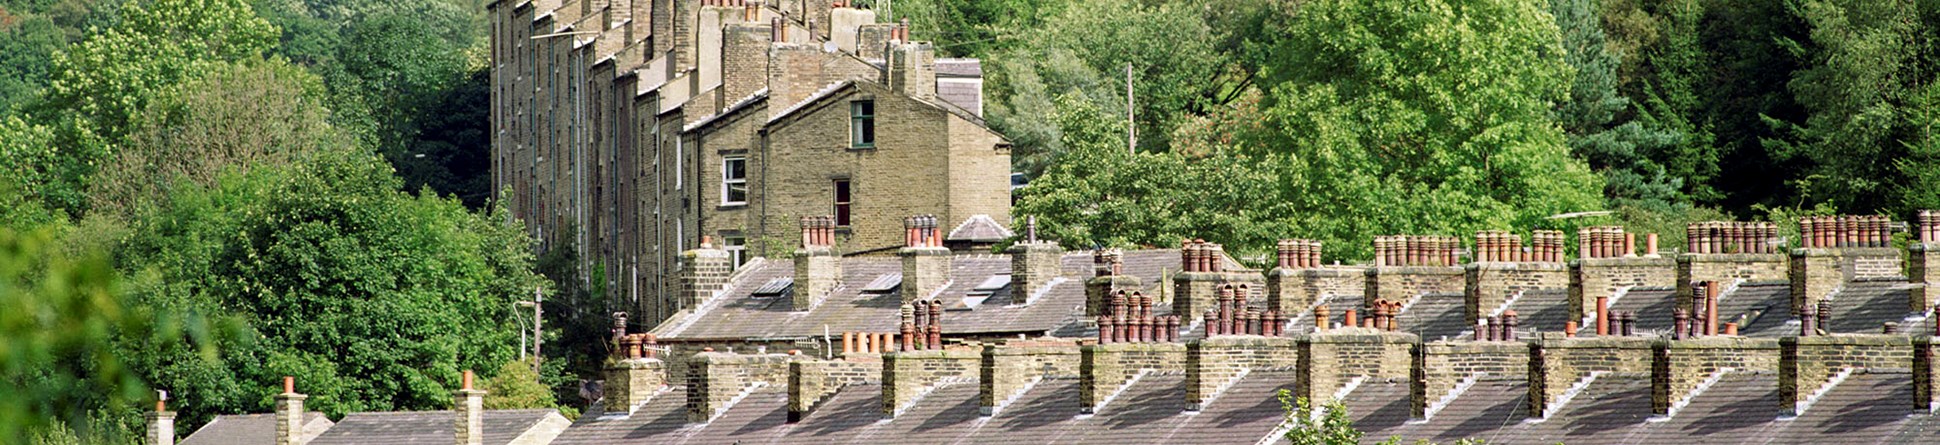 Photo of rooftops and chimneys of West Yorkshire terraced housing, nested within trees. The houses are sitting withing a small valley.